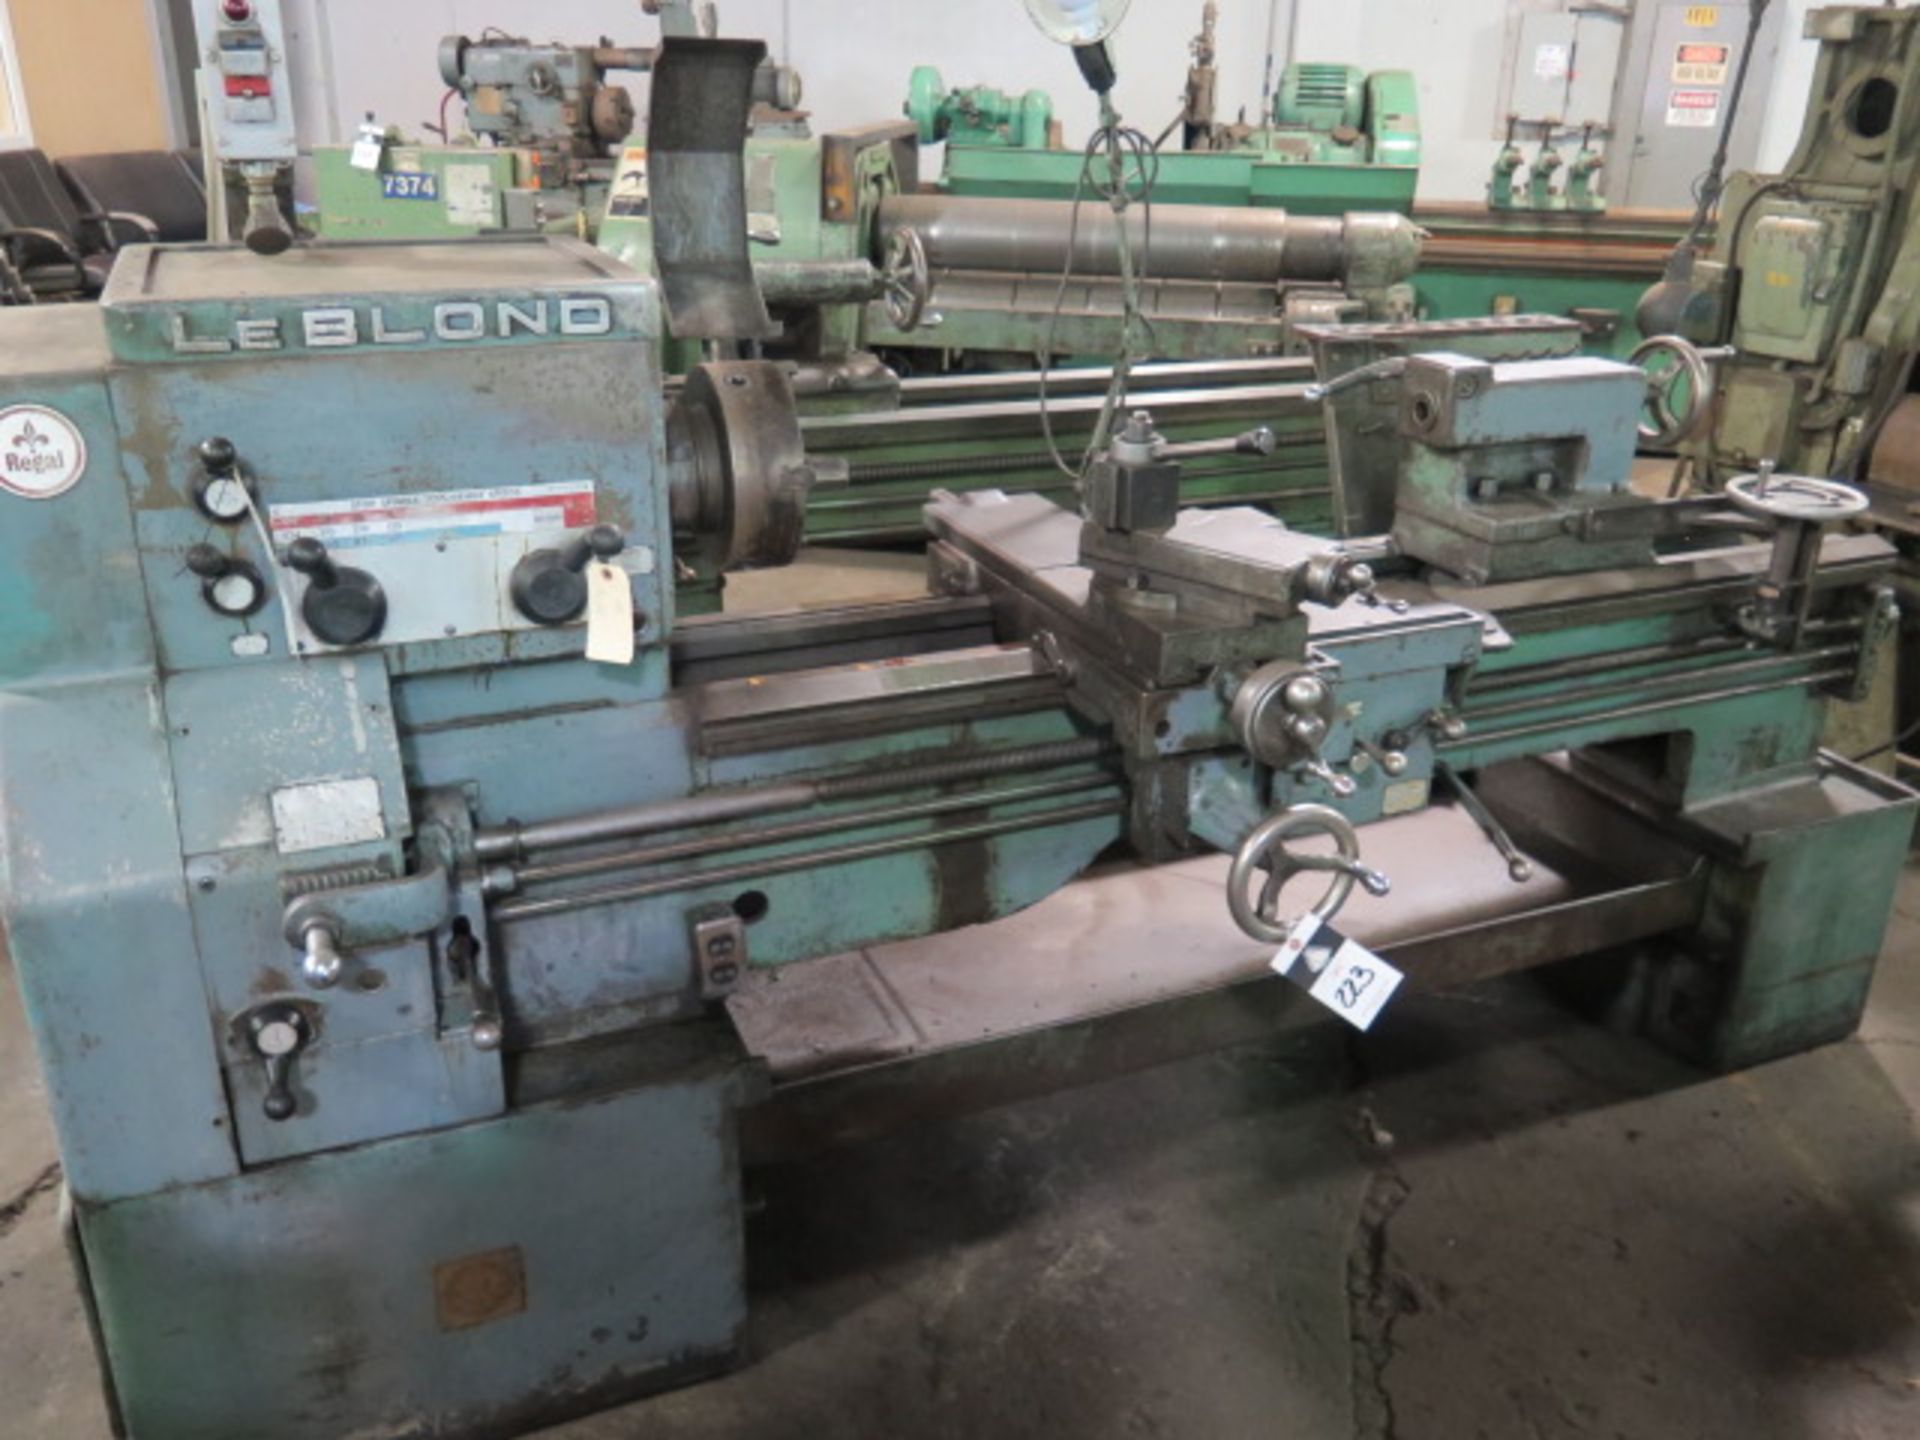 LeBlond Regal 19” x 58” Geared Head Lathe w/ 40-1600 RPM, Inch Threading, Tailstock, SOLD AS IS